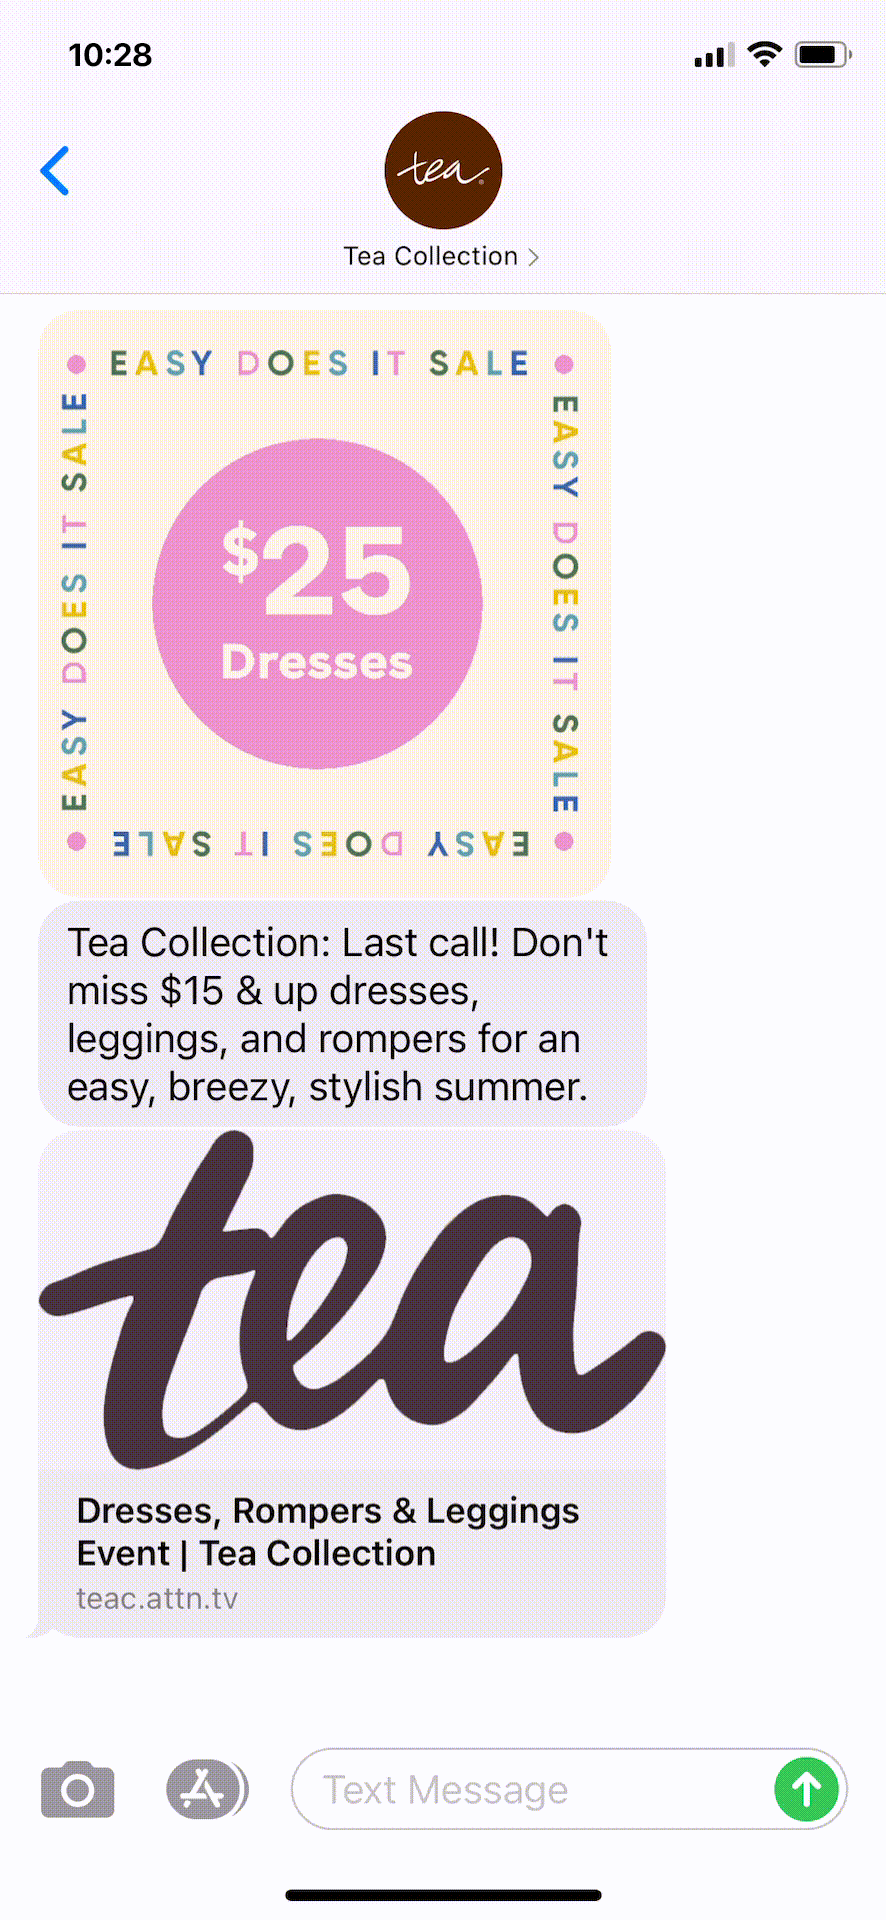 Tea-Collection-Text-Message-Marketing-Example-06.06.2021